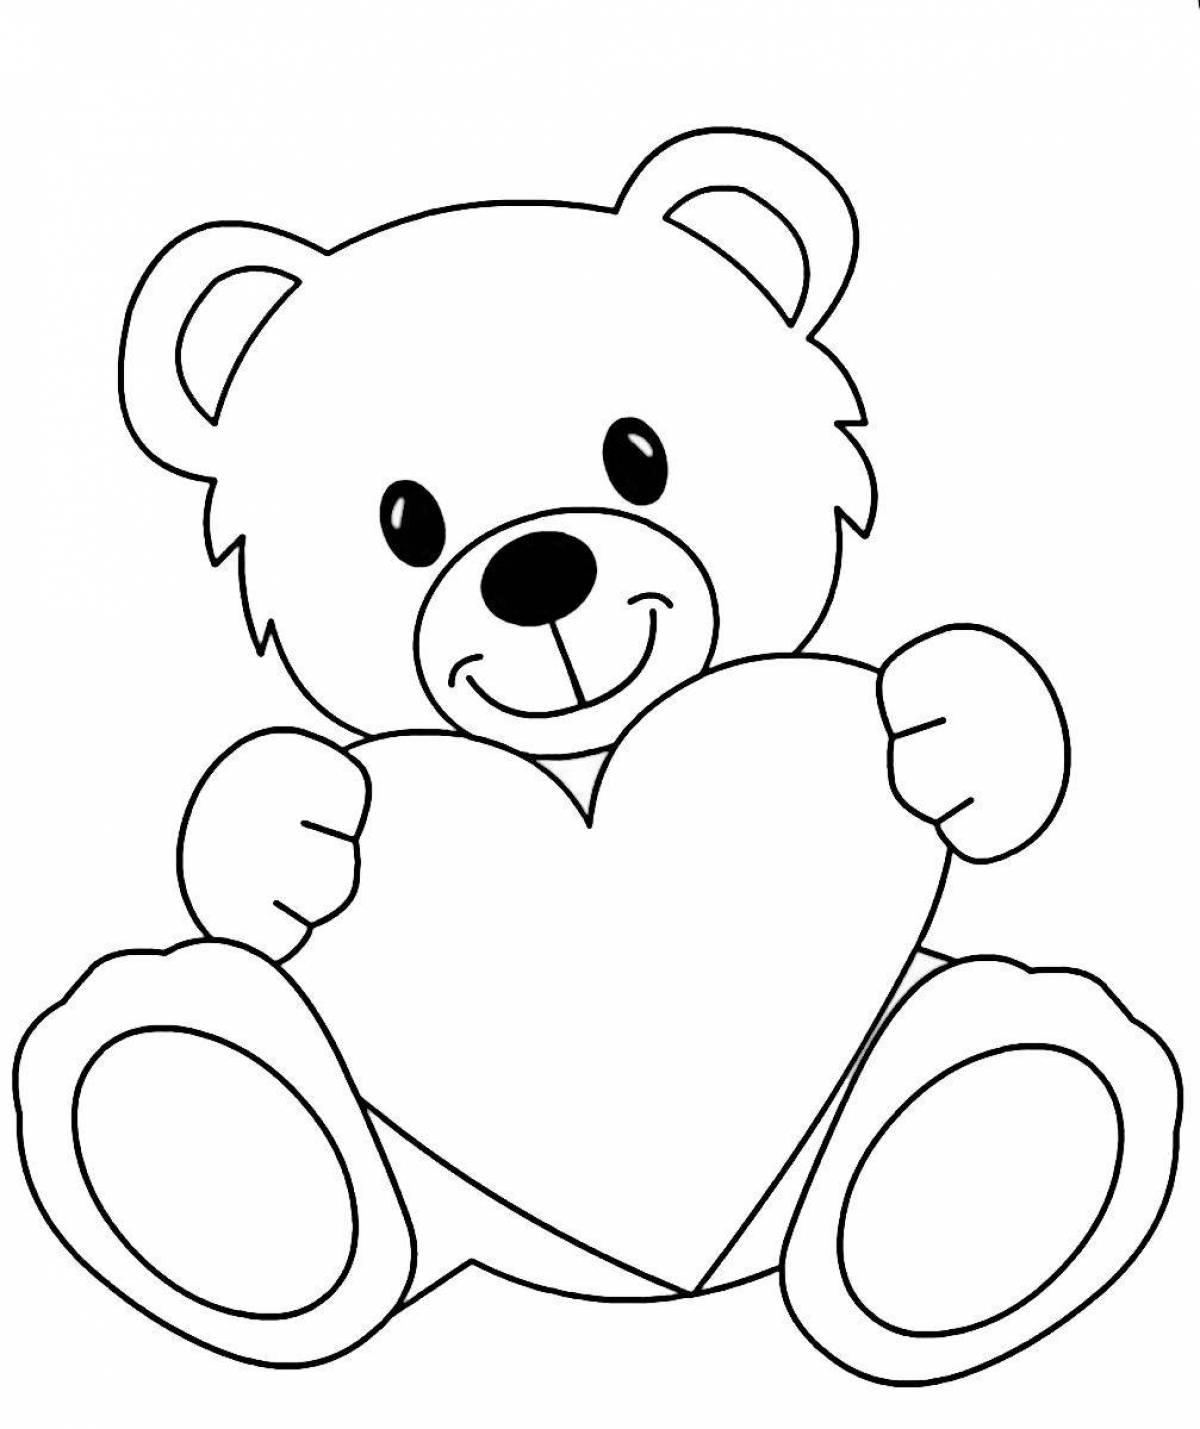 Adorable bear with heart pattern